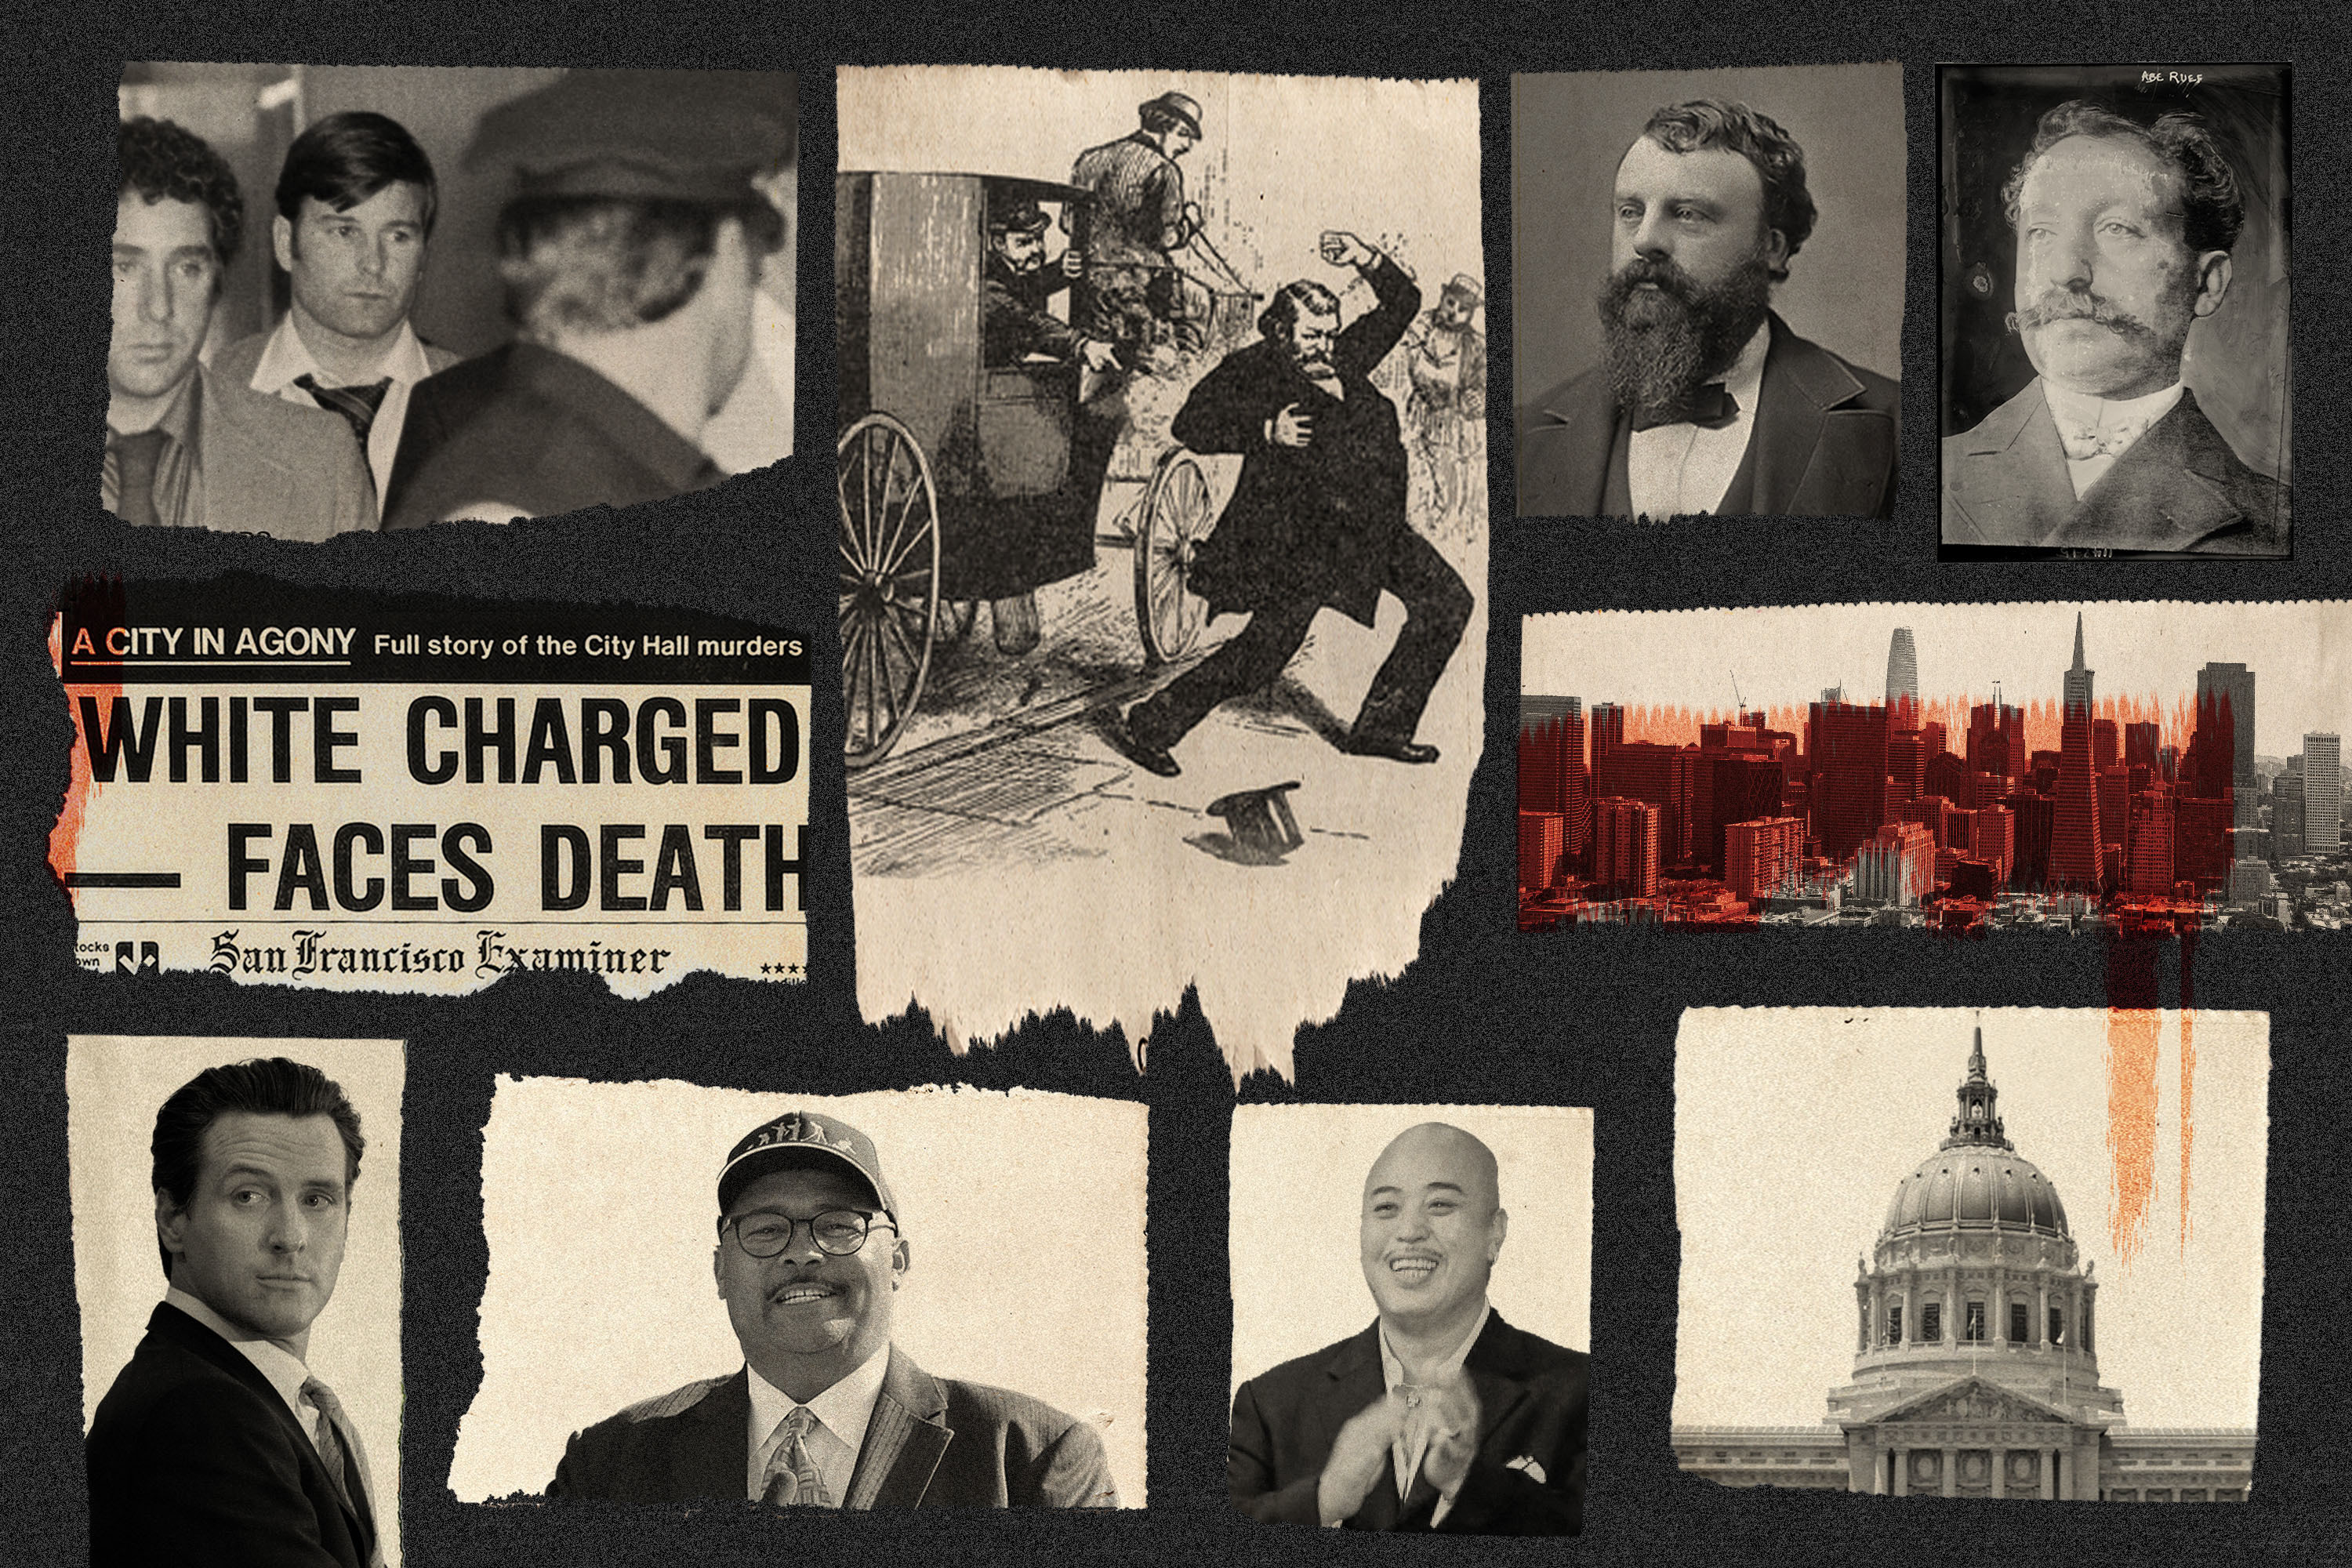 A photo illustration that includes Supervisor Dan White, Charles de Young, Reverend Issac Kalloch, Abe “Boss” Ruef, San Francisco Mayor Gavin Newsom, Department of Public Works Director Mohammed Nuru and Raymond "Shrimp Boy" Chow and a newspaper clipping that says "WHITE CHARGED - FACES DEATH".